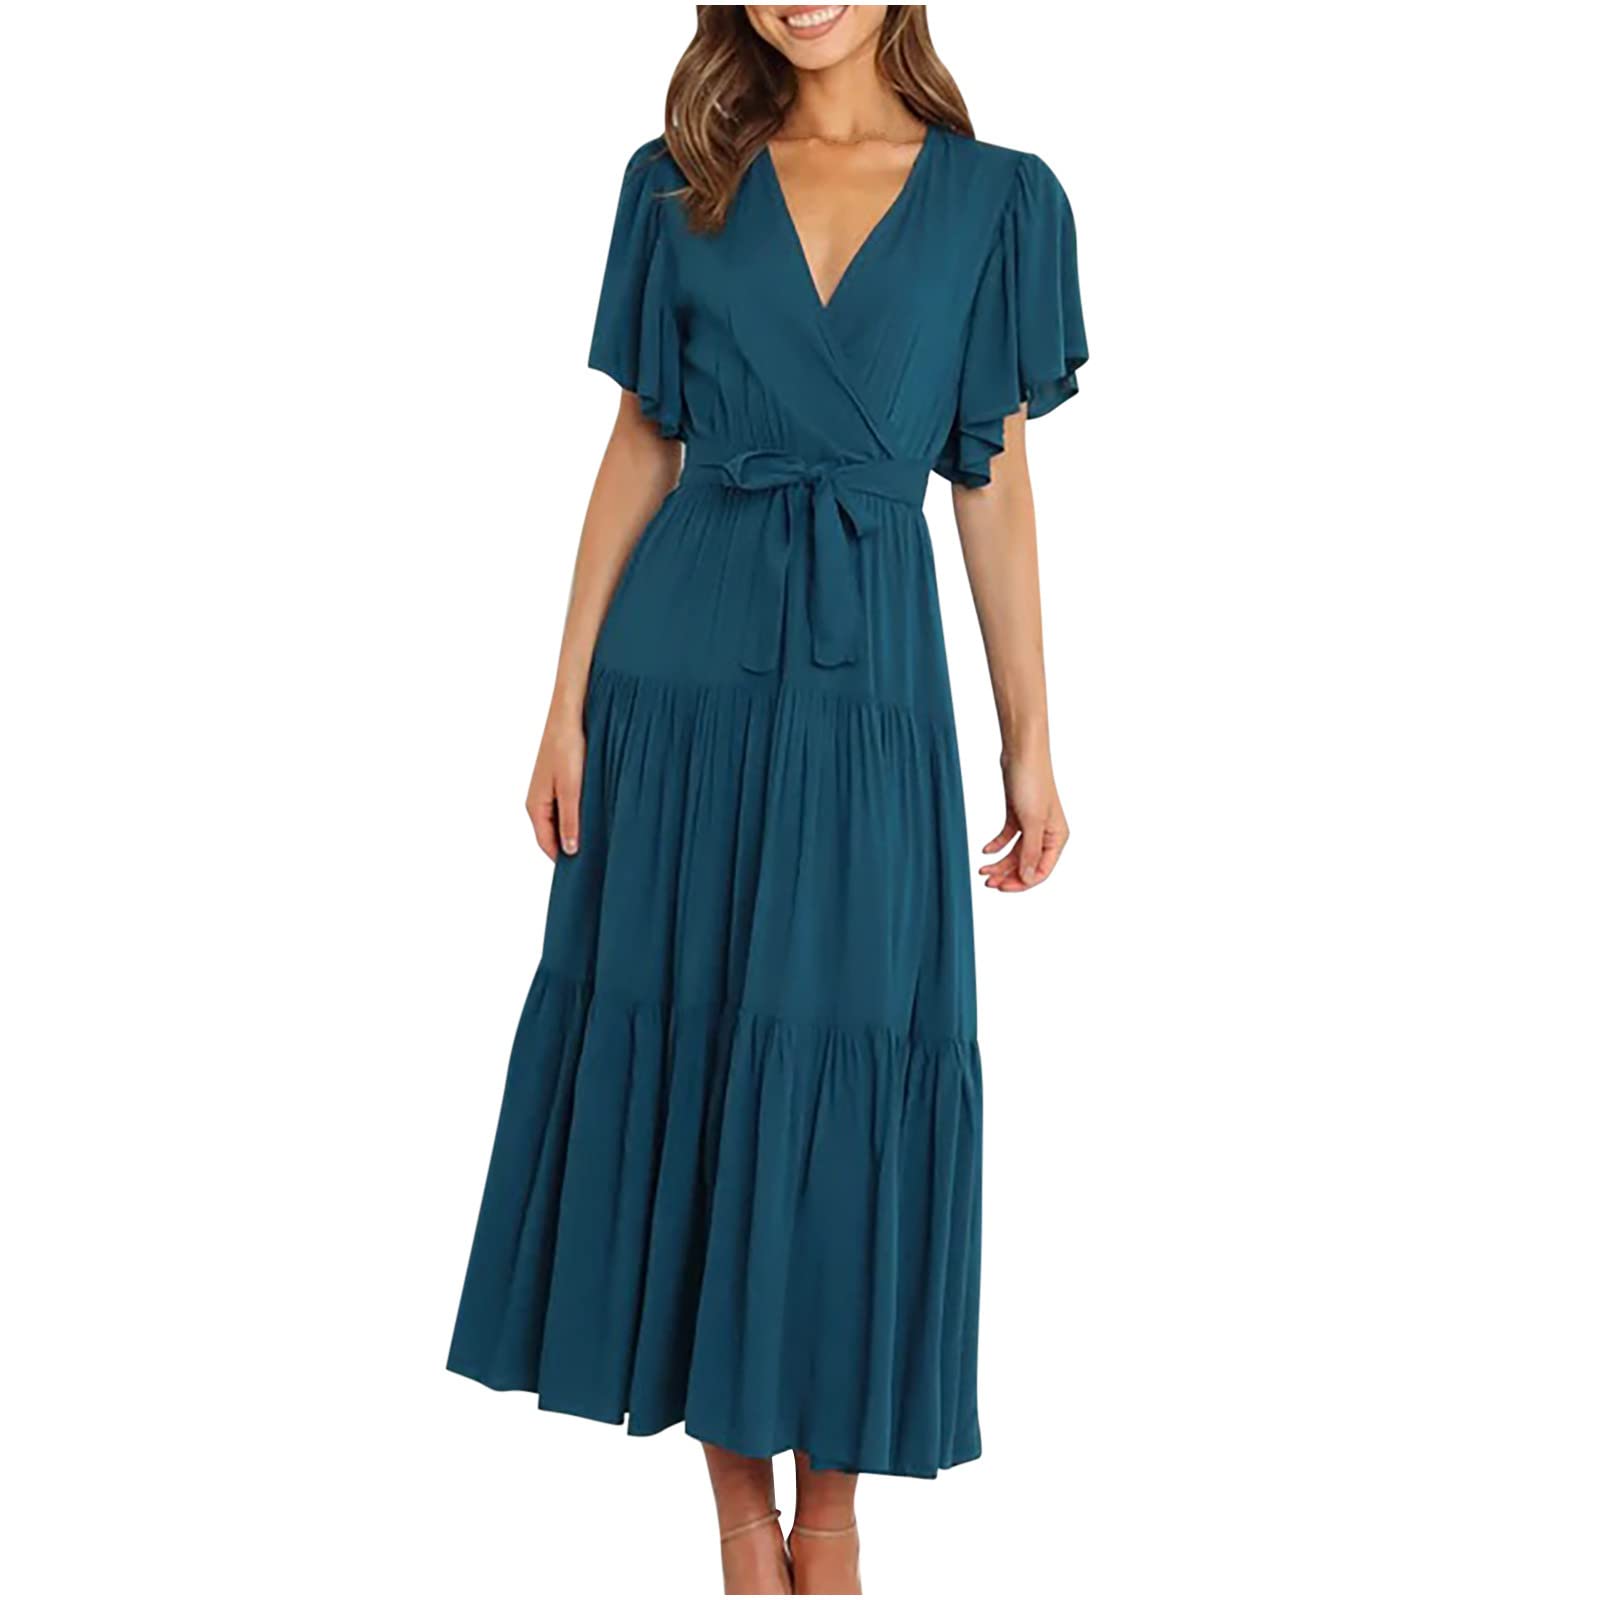 IN'VOLAND Women's Plus Size Bohemian Maxi Dress Cold Shoulder Ruffle Summer  Beach Party Dress Flowy V Neck Dress Blue Green at  Women's Clothing  store